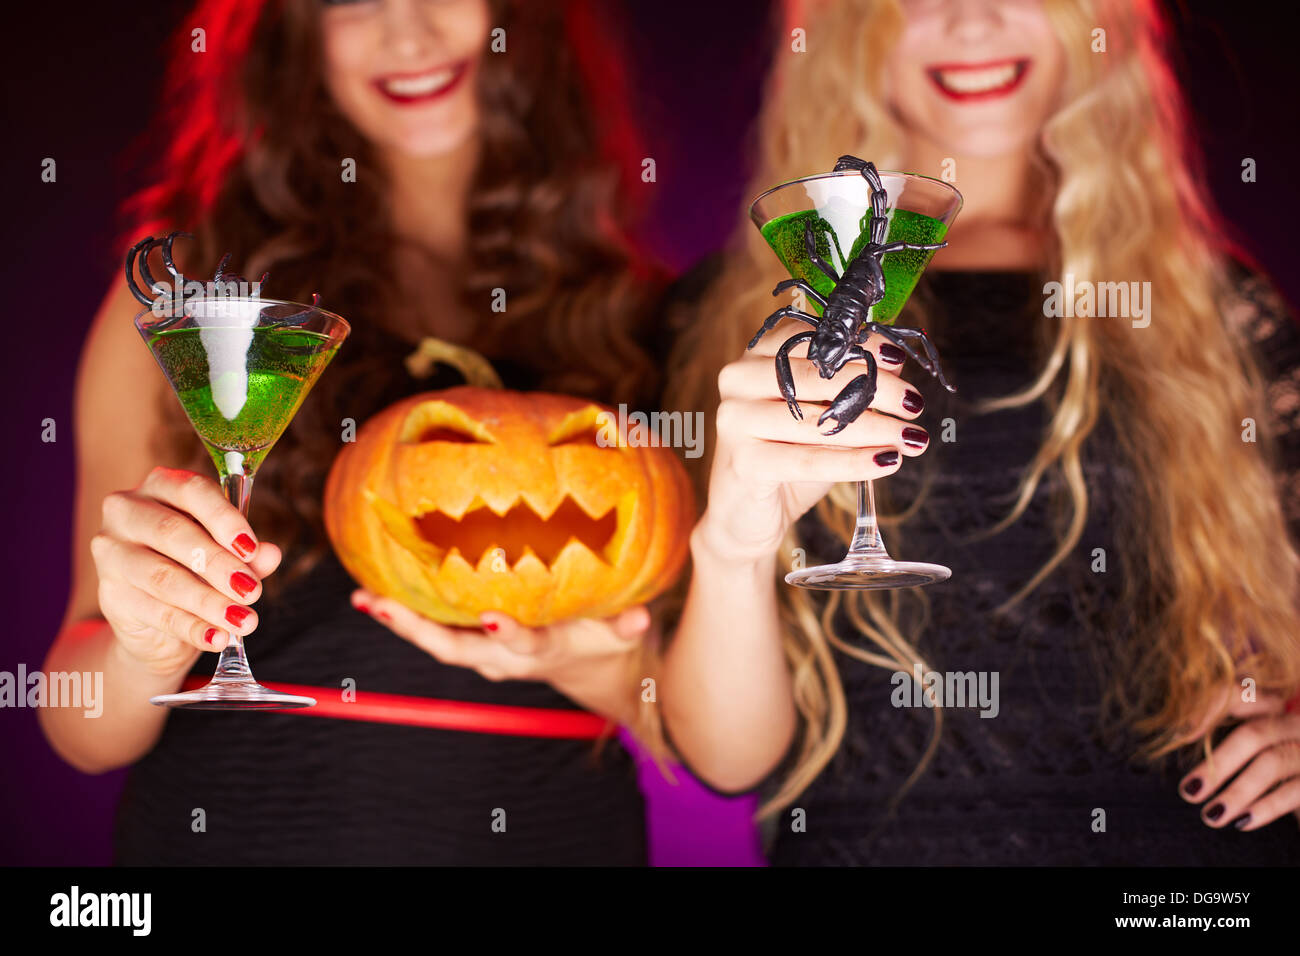 Photo of carved Halloween pumpkin and cocktails with scorpions held by females Stock Photo